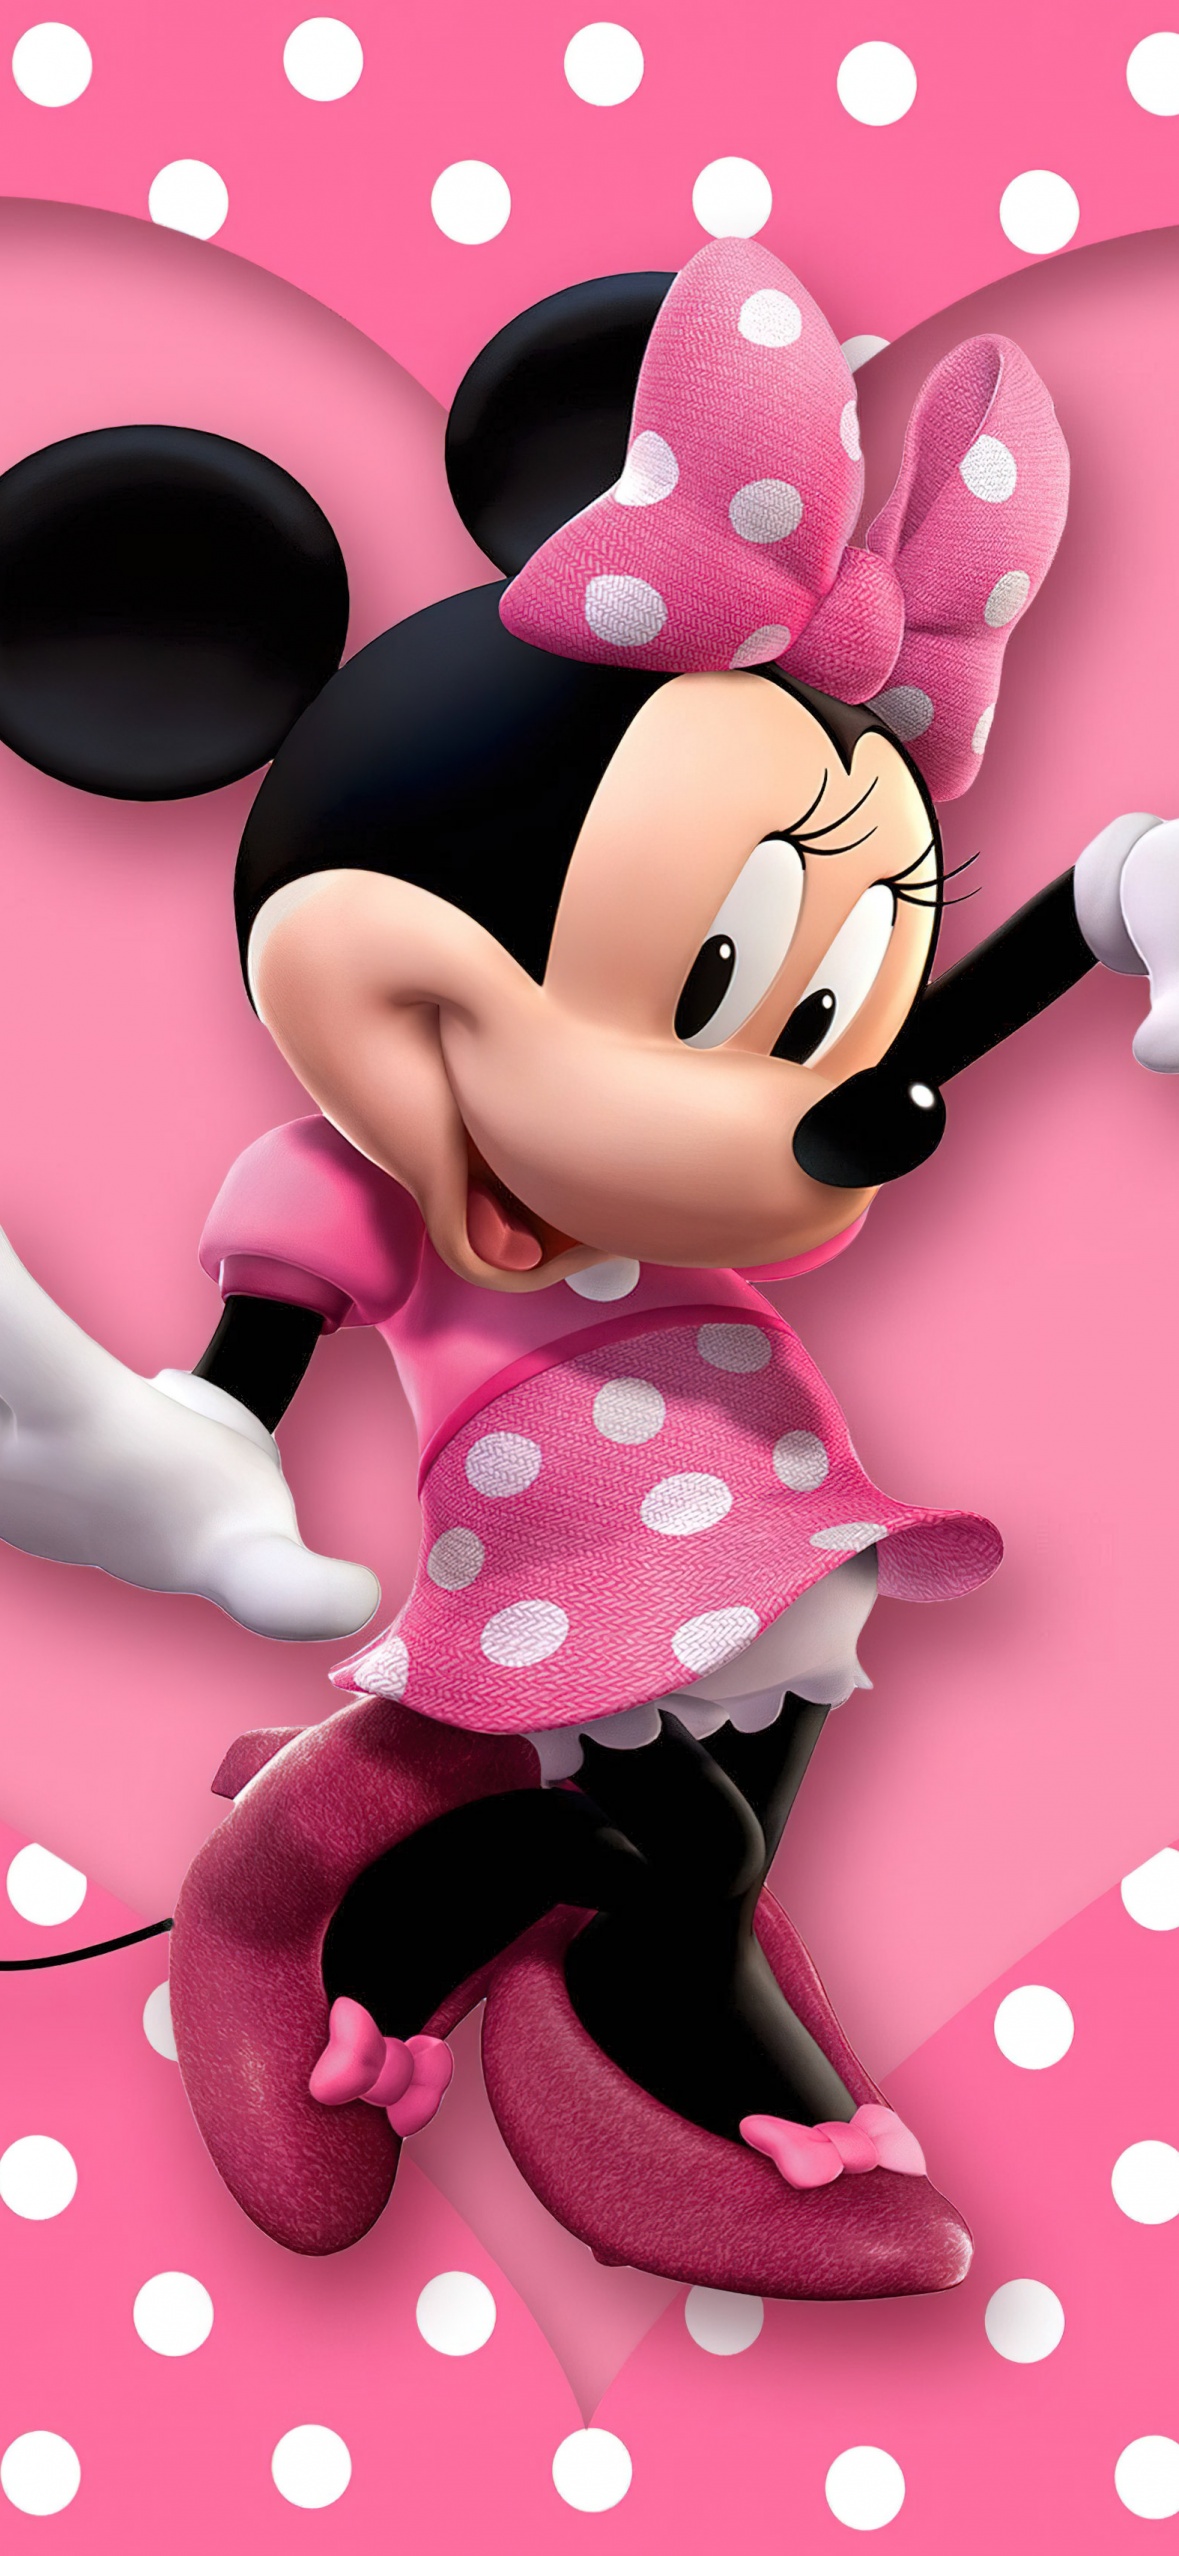 Cute Mickey Mouse IPhone Wallpaper 71 images